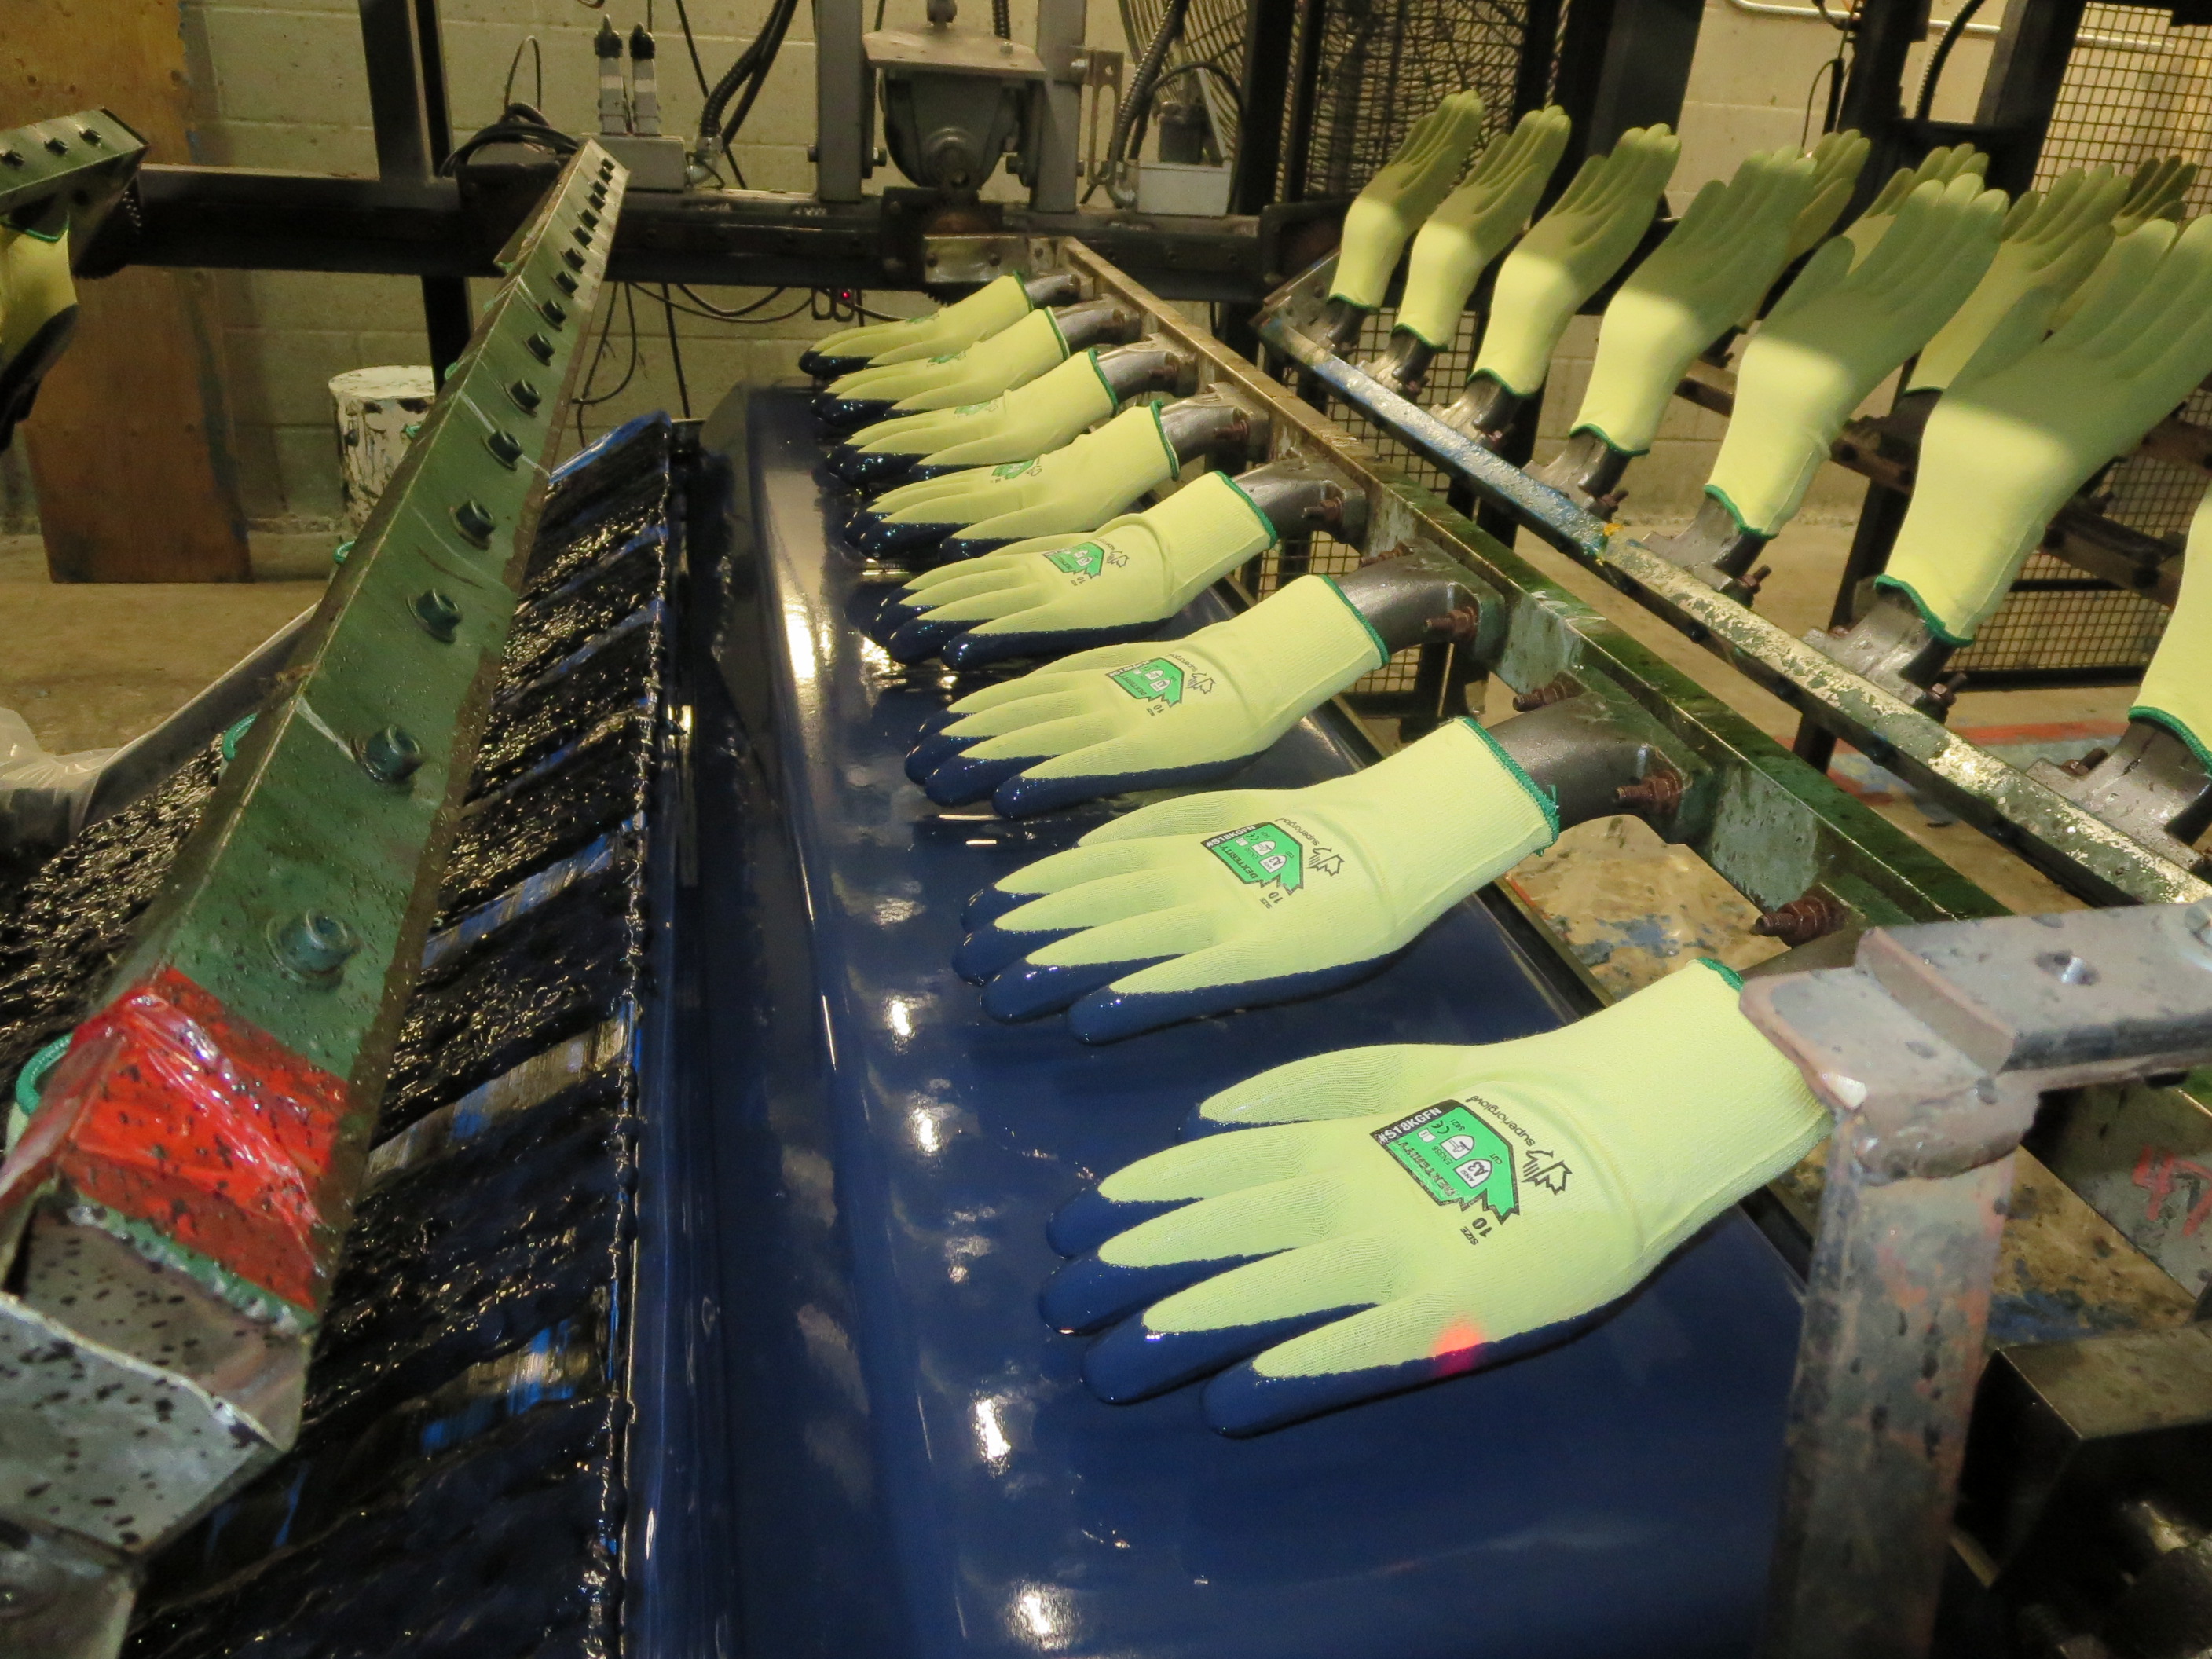 Superior Glove kevlar gloves being dipped in blue nitrile palm dip coating